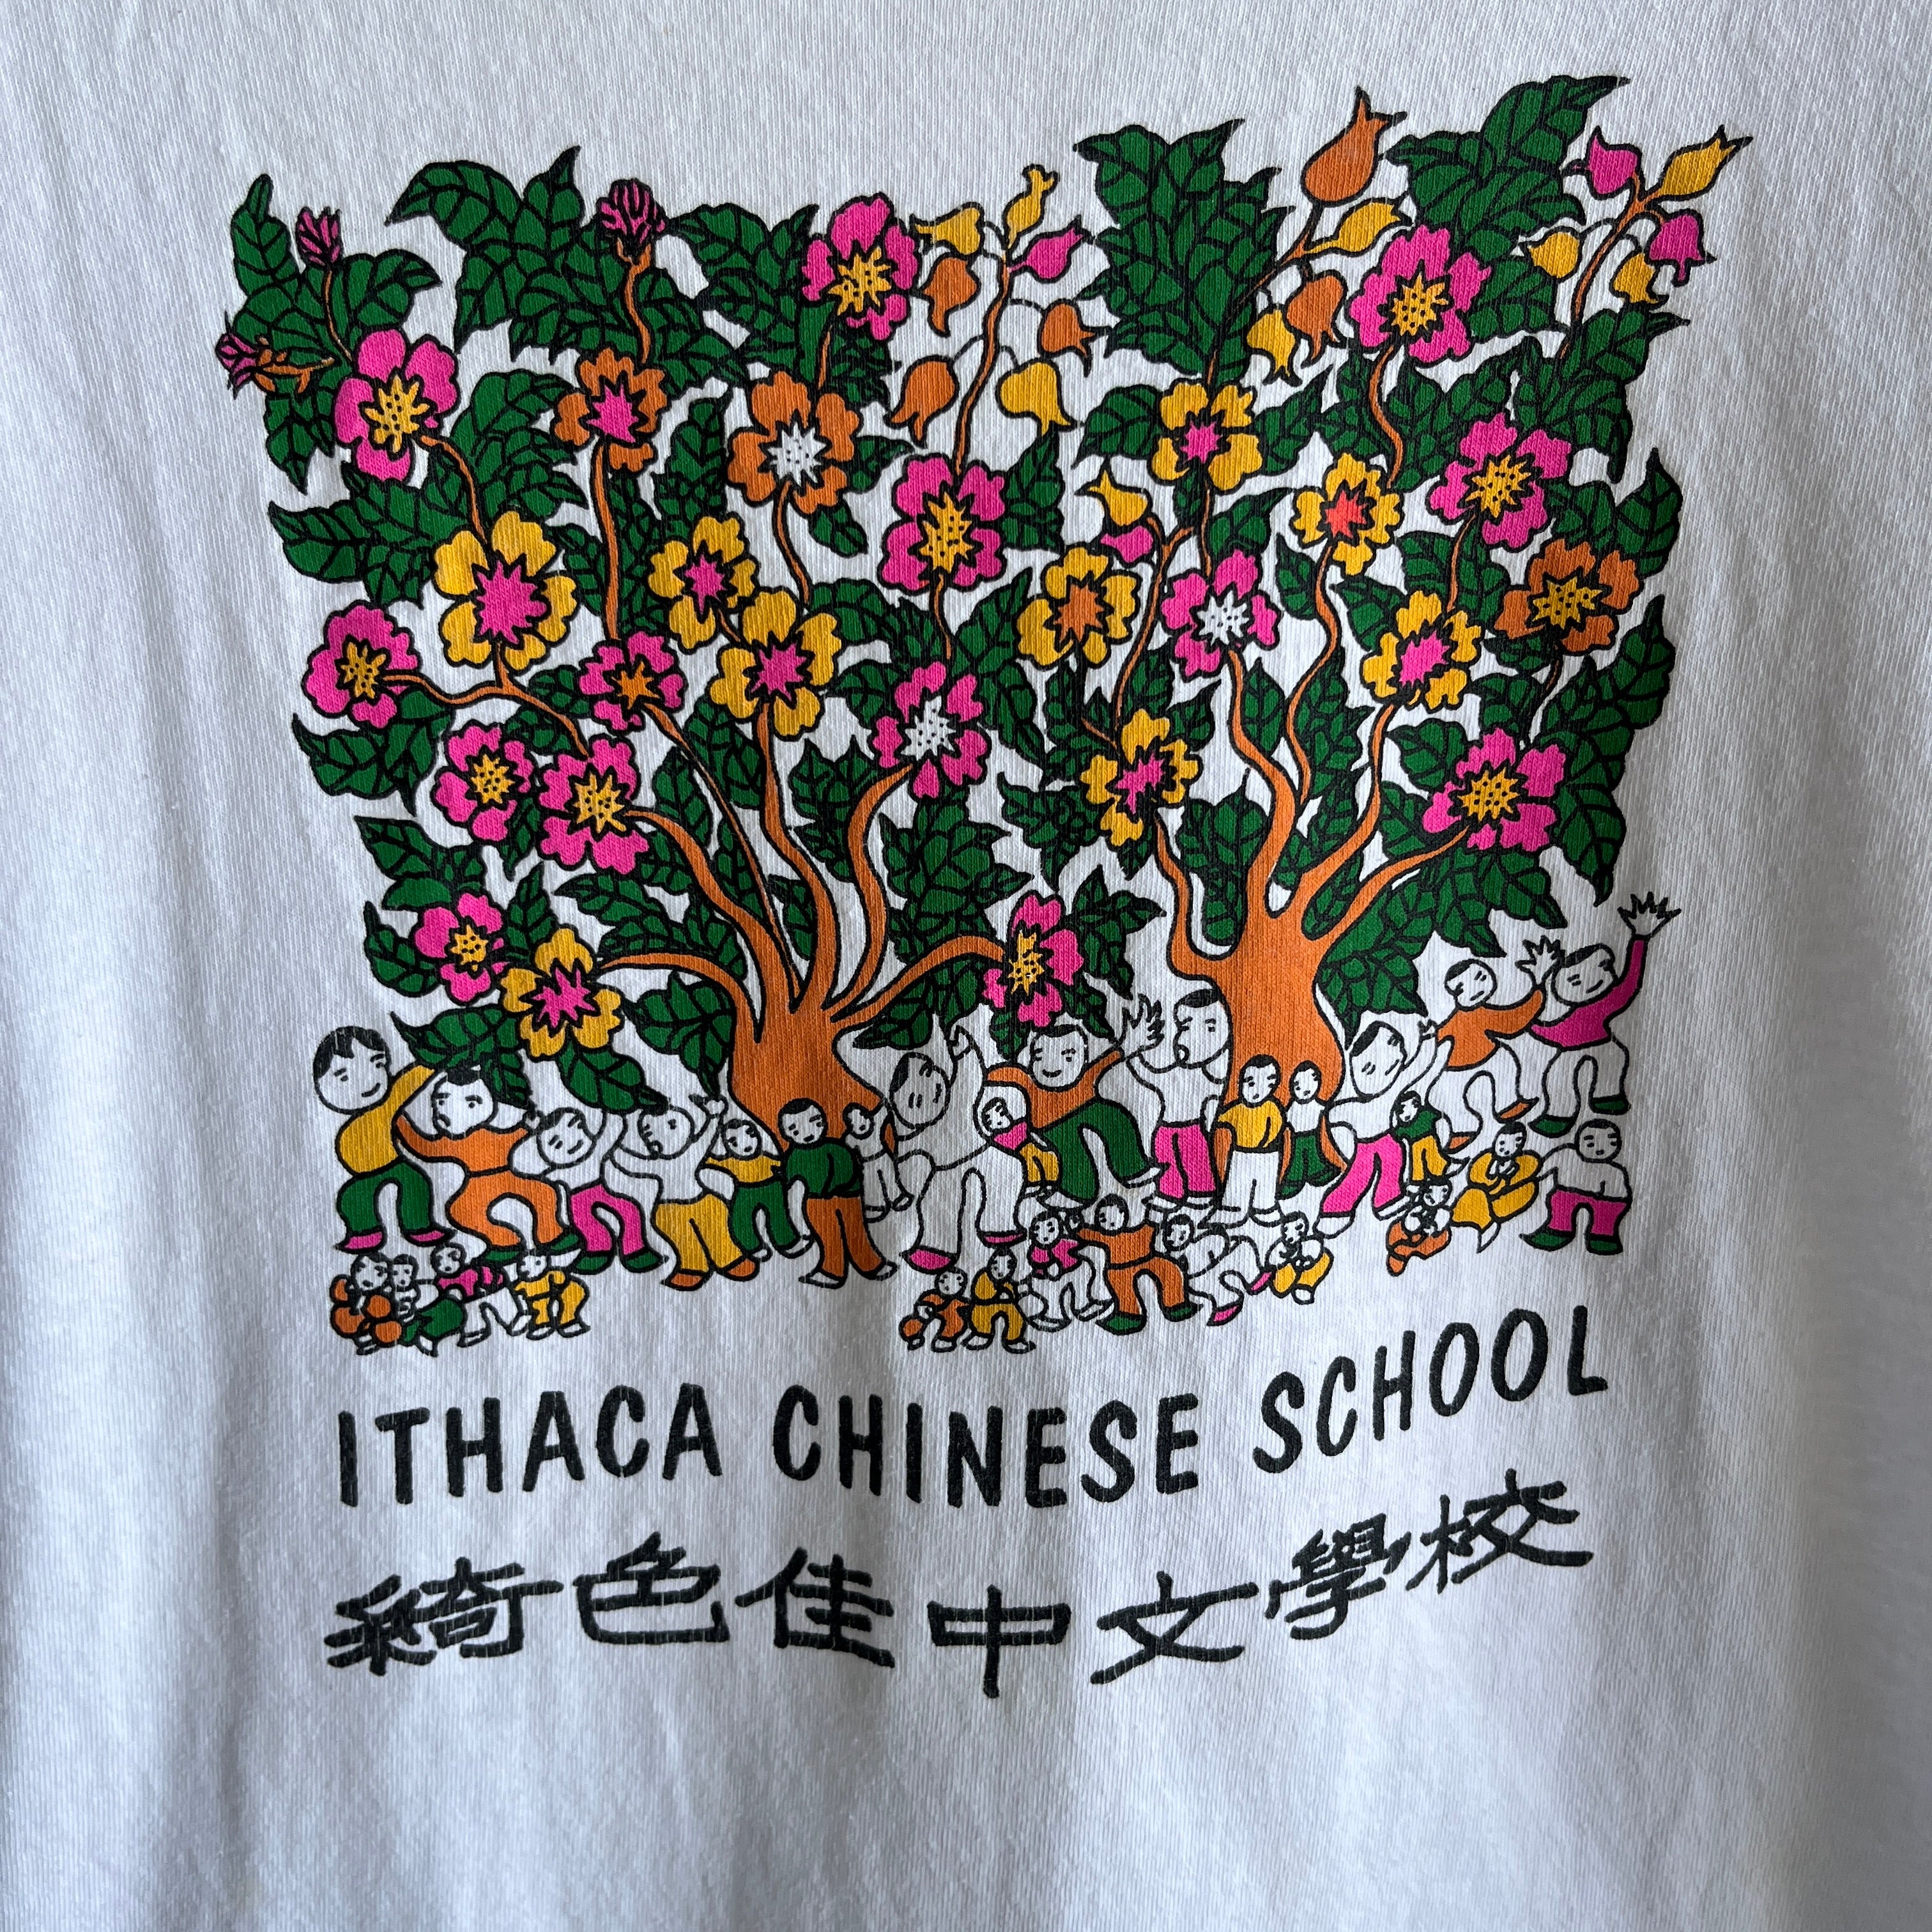 1980s Ithaca Chinese School Destroyed T-Shirt (Personal Collection Piece)